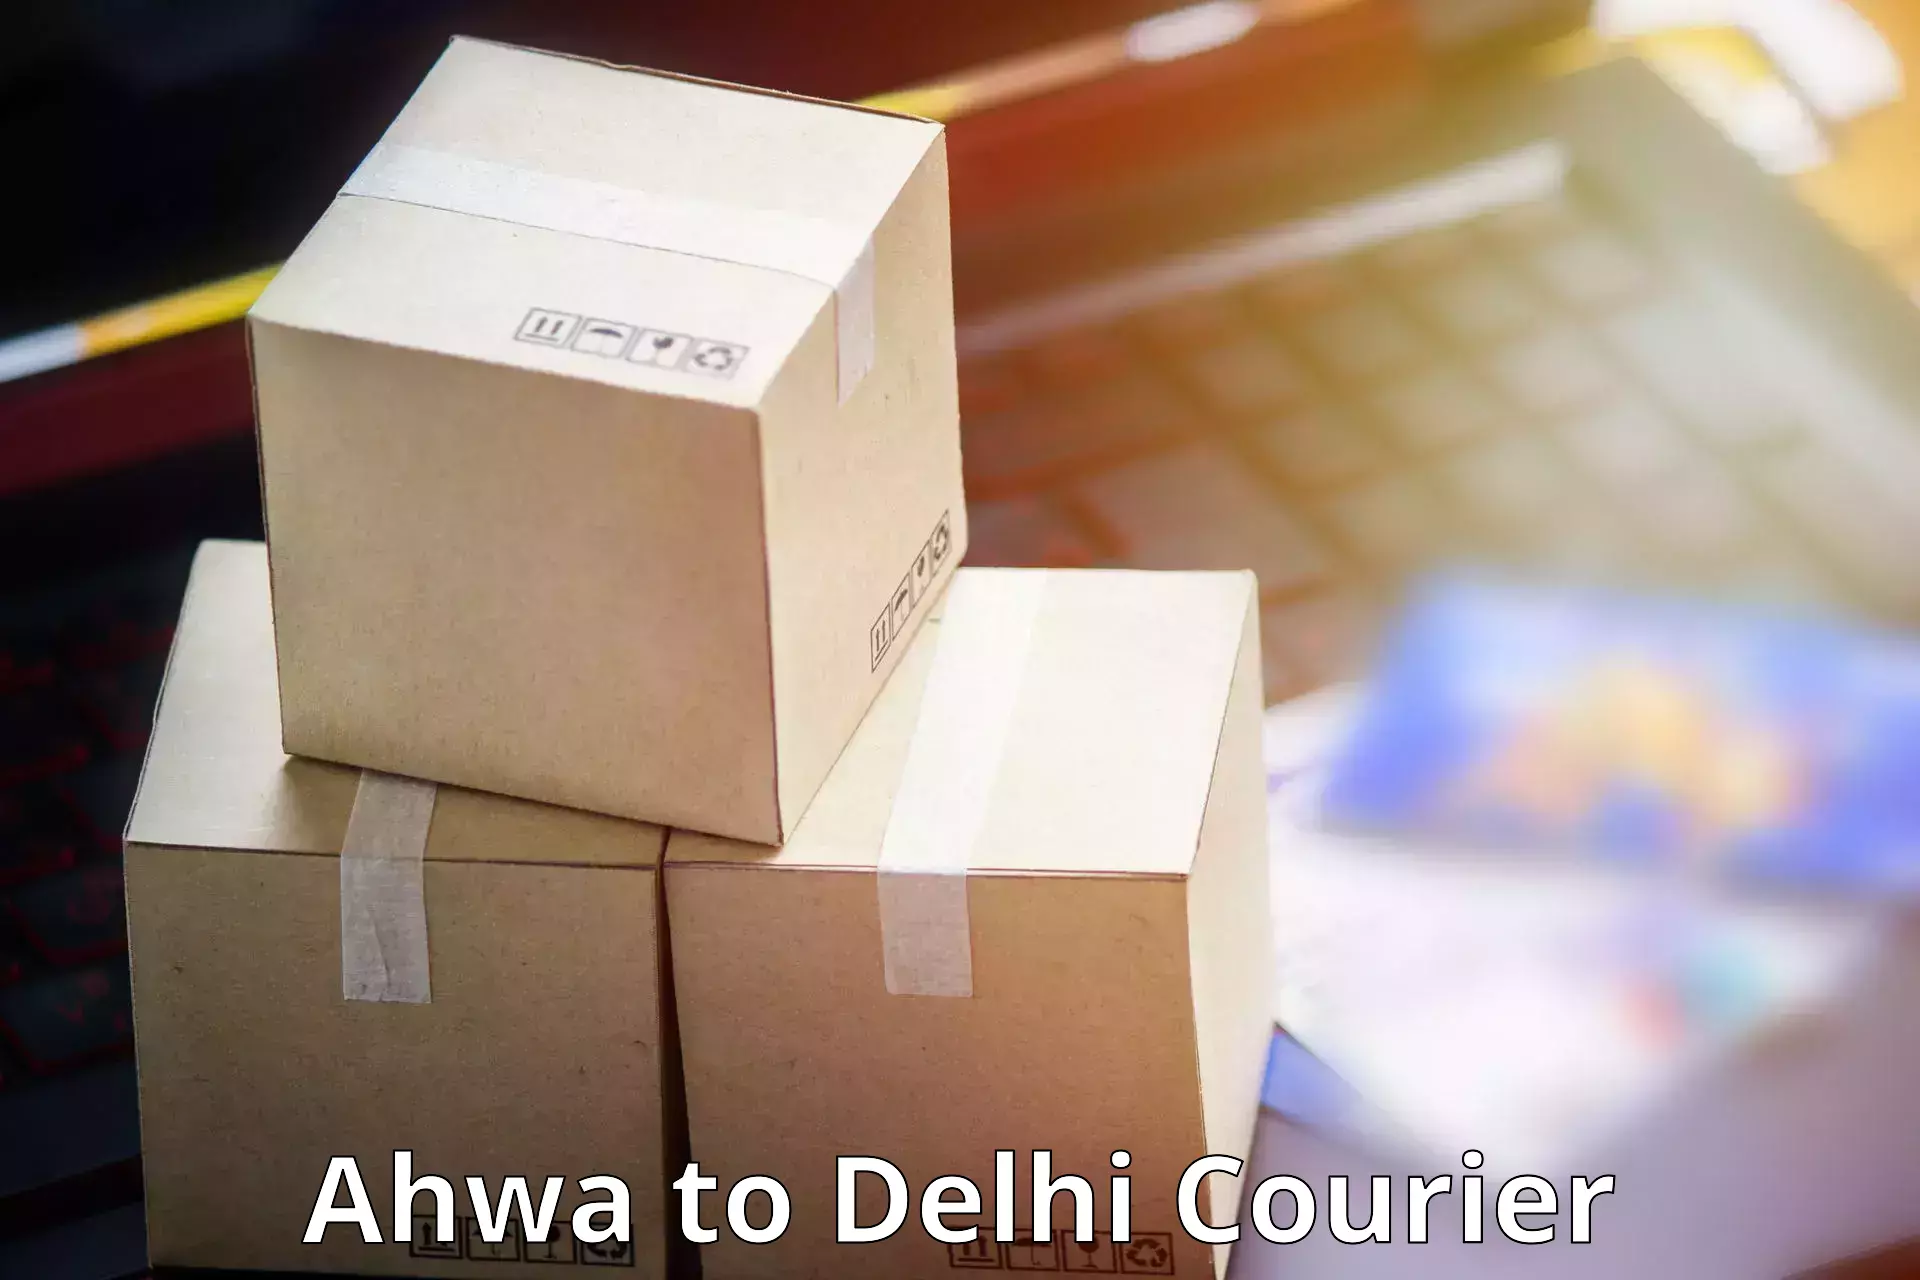 Premium courier solutions Ahwa to Lodhi Road